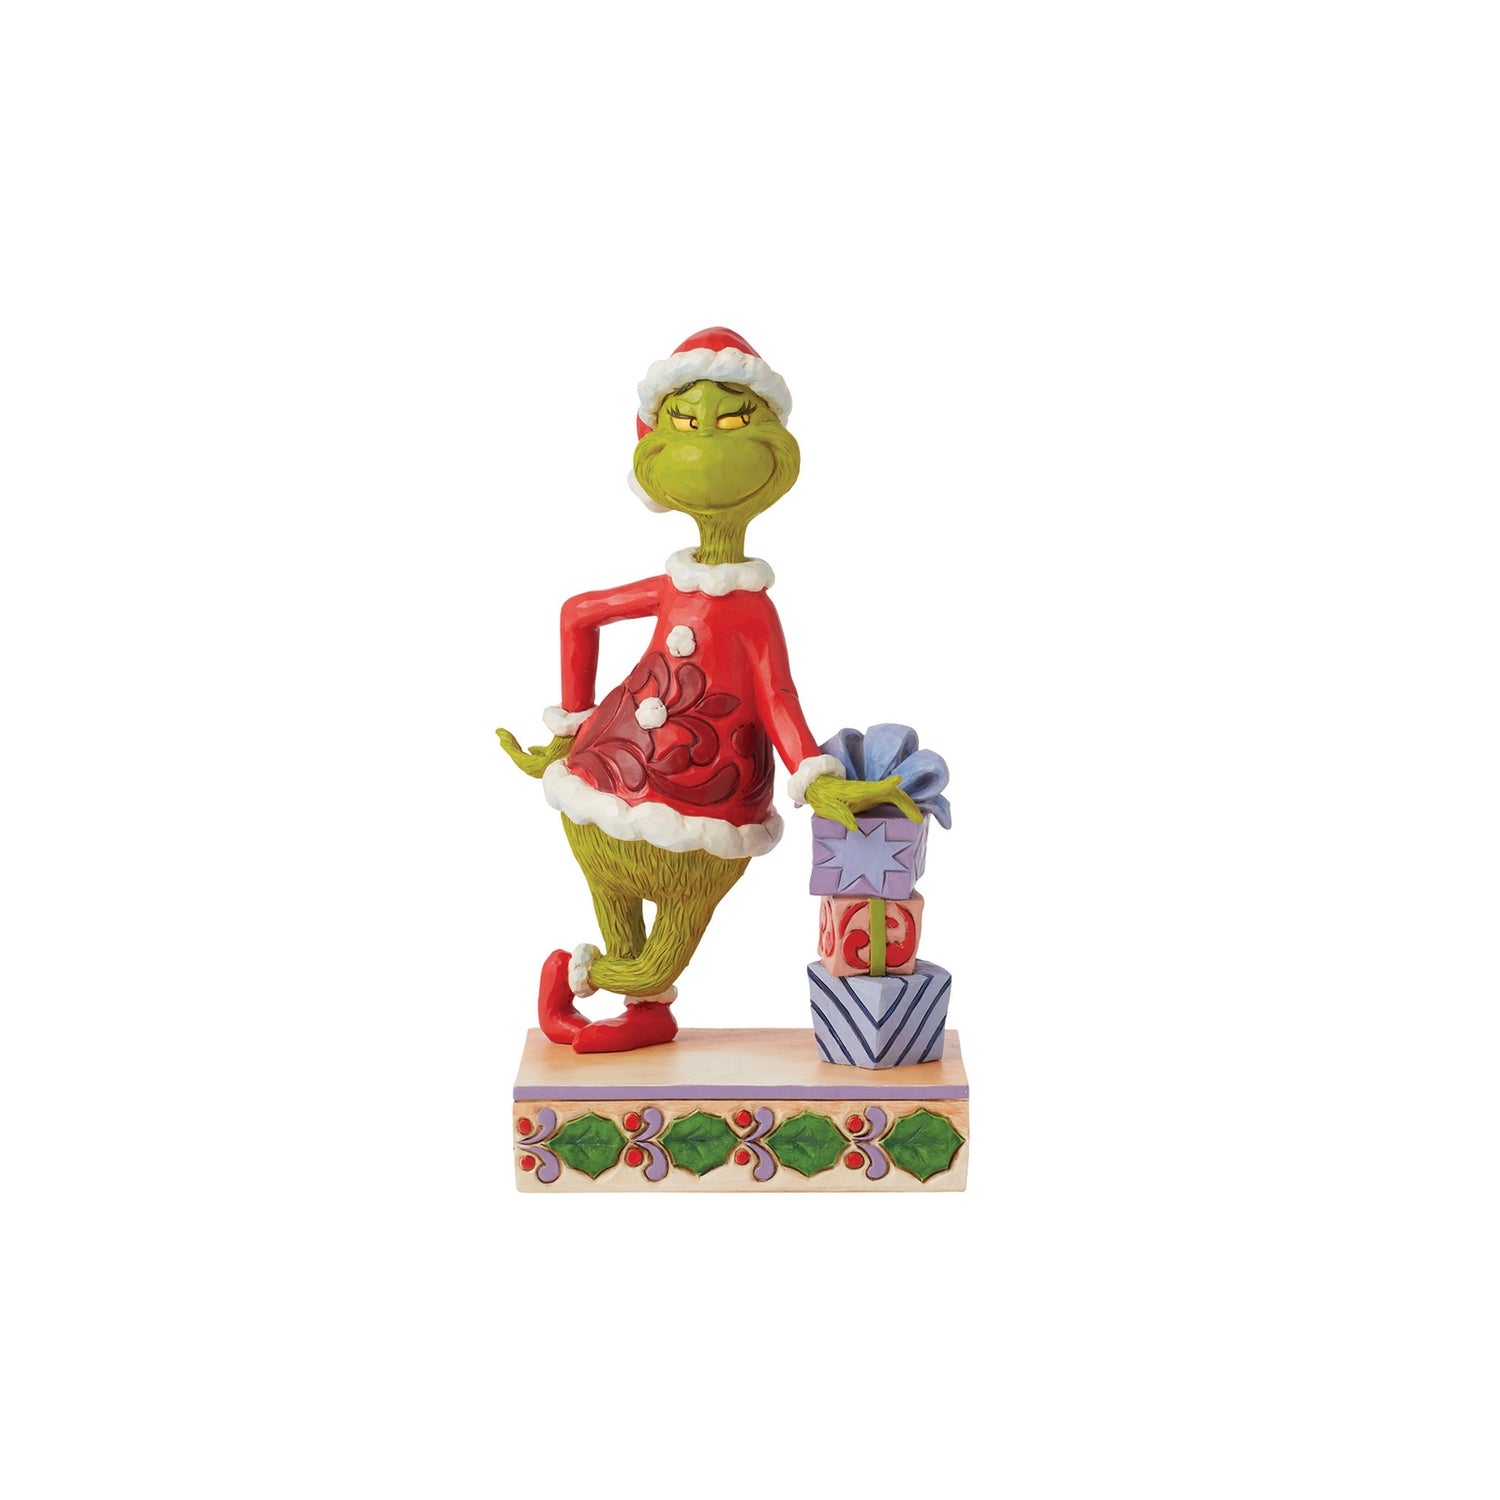 Enesco Grinch Leaning on Gifts Figurine (20.5cm)